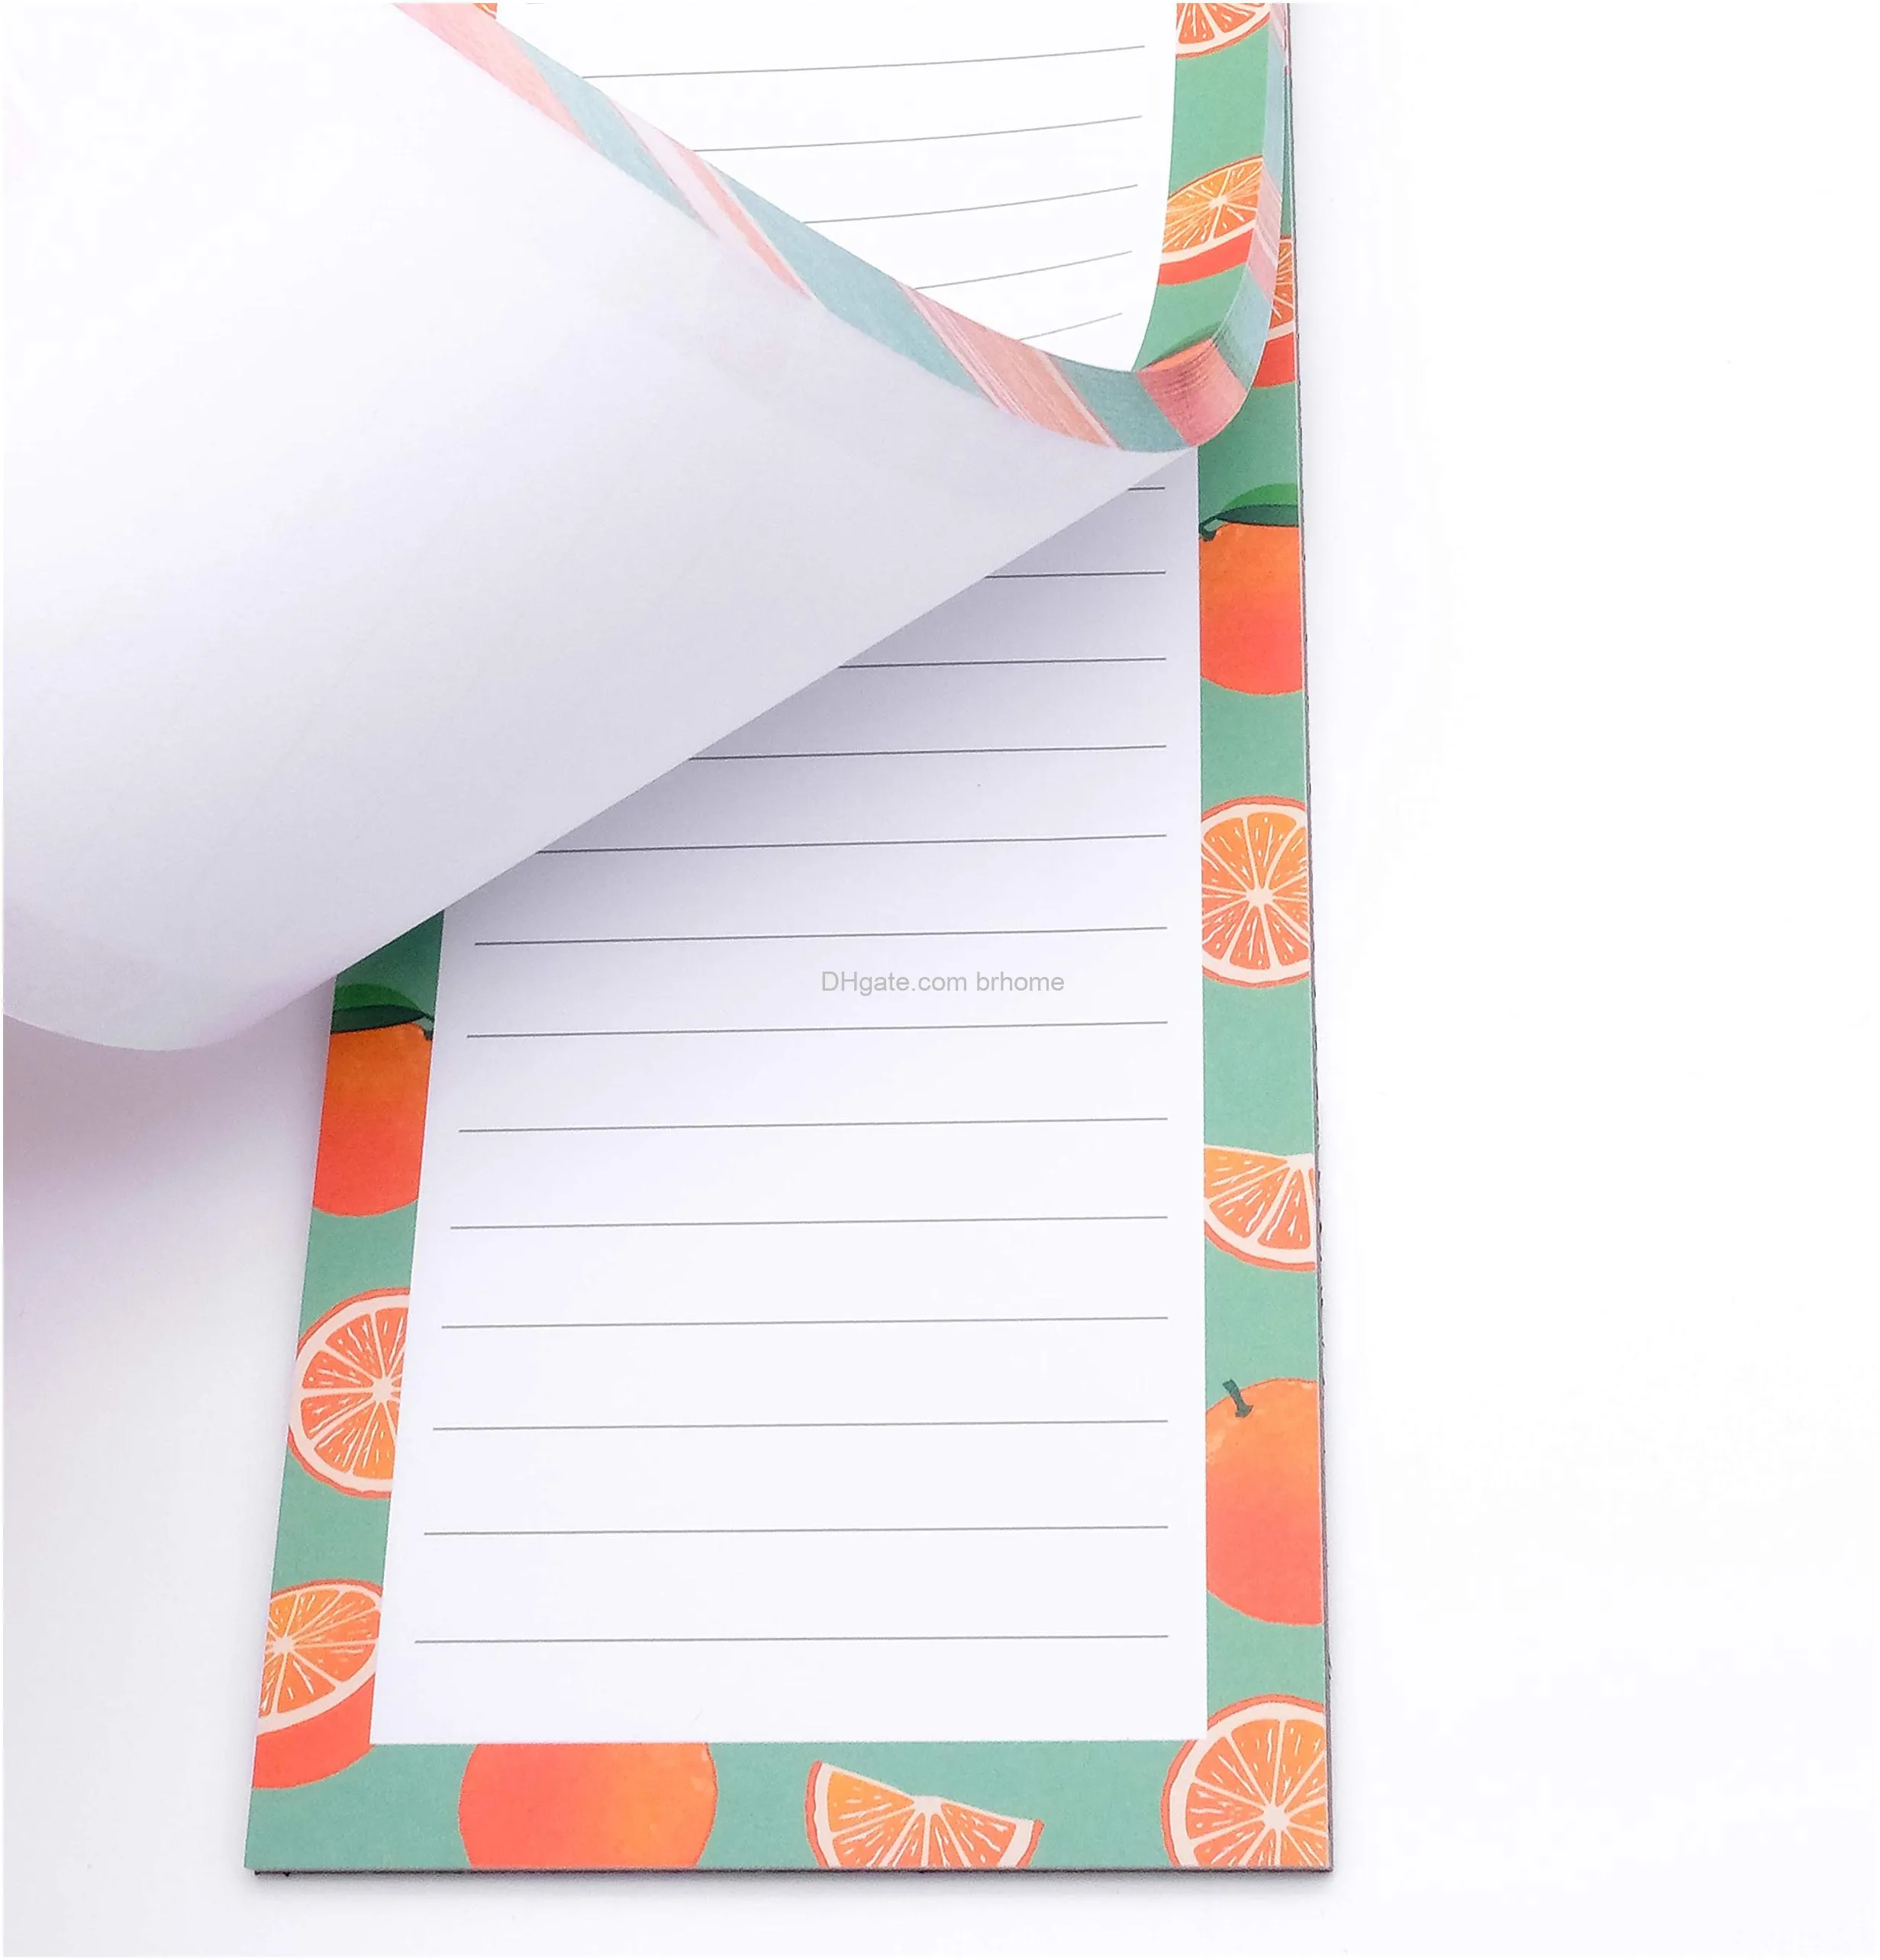 8 magnetic notepads large notepads for grocery list shopping list todo list reminders recipes magnetic back memo notepad with realistic fruit designs 60 sheets per pad 9 x 3.5 inch 